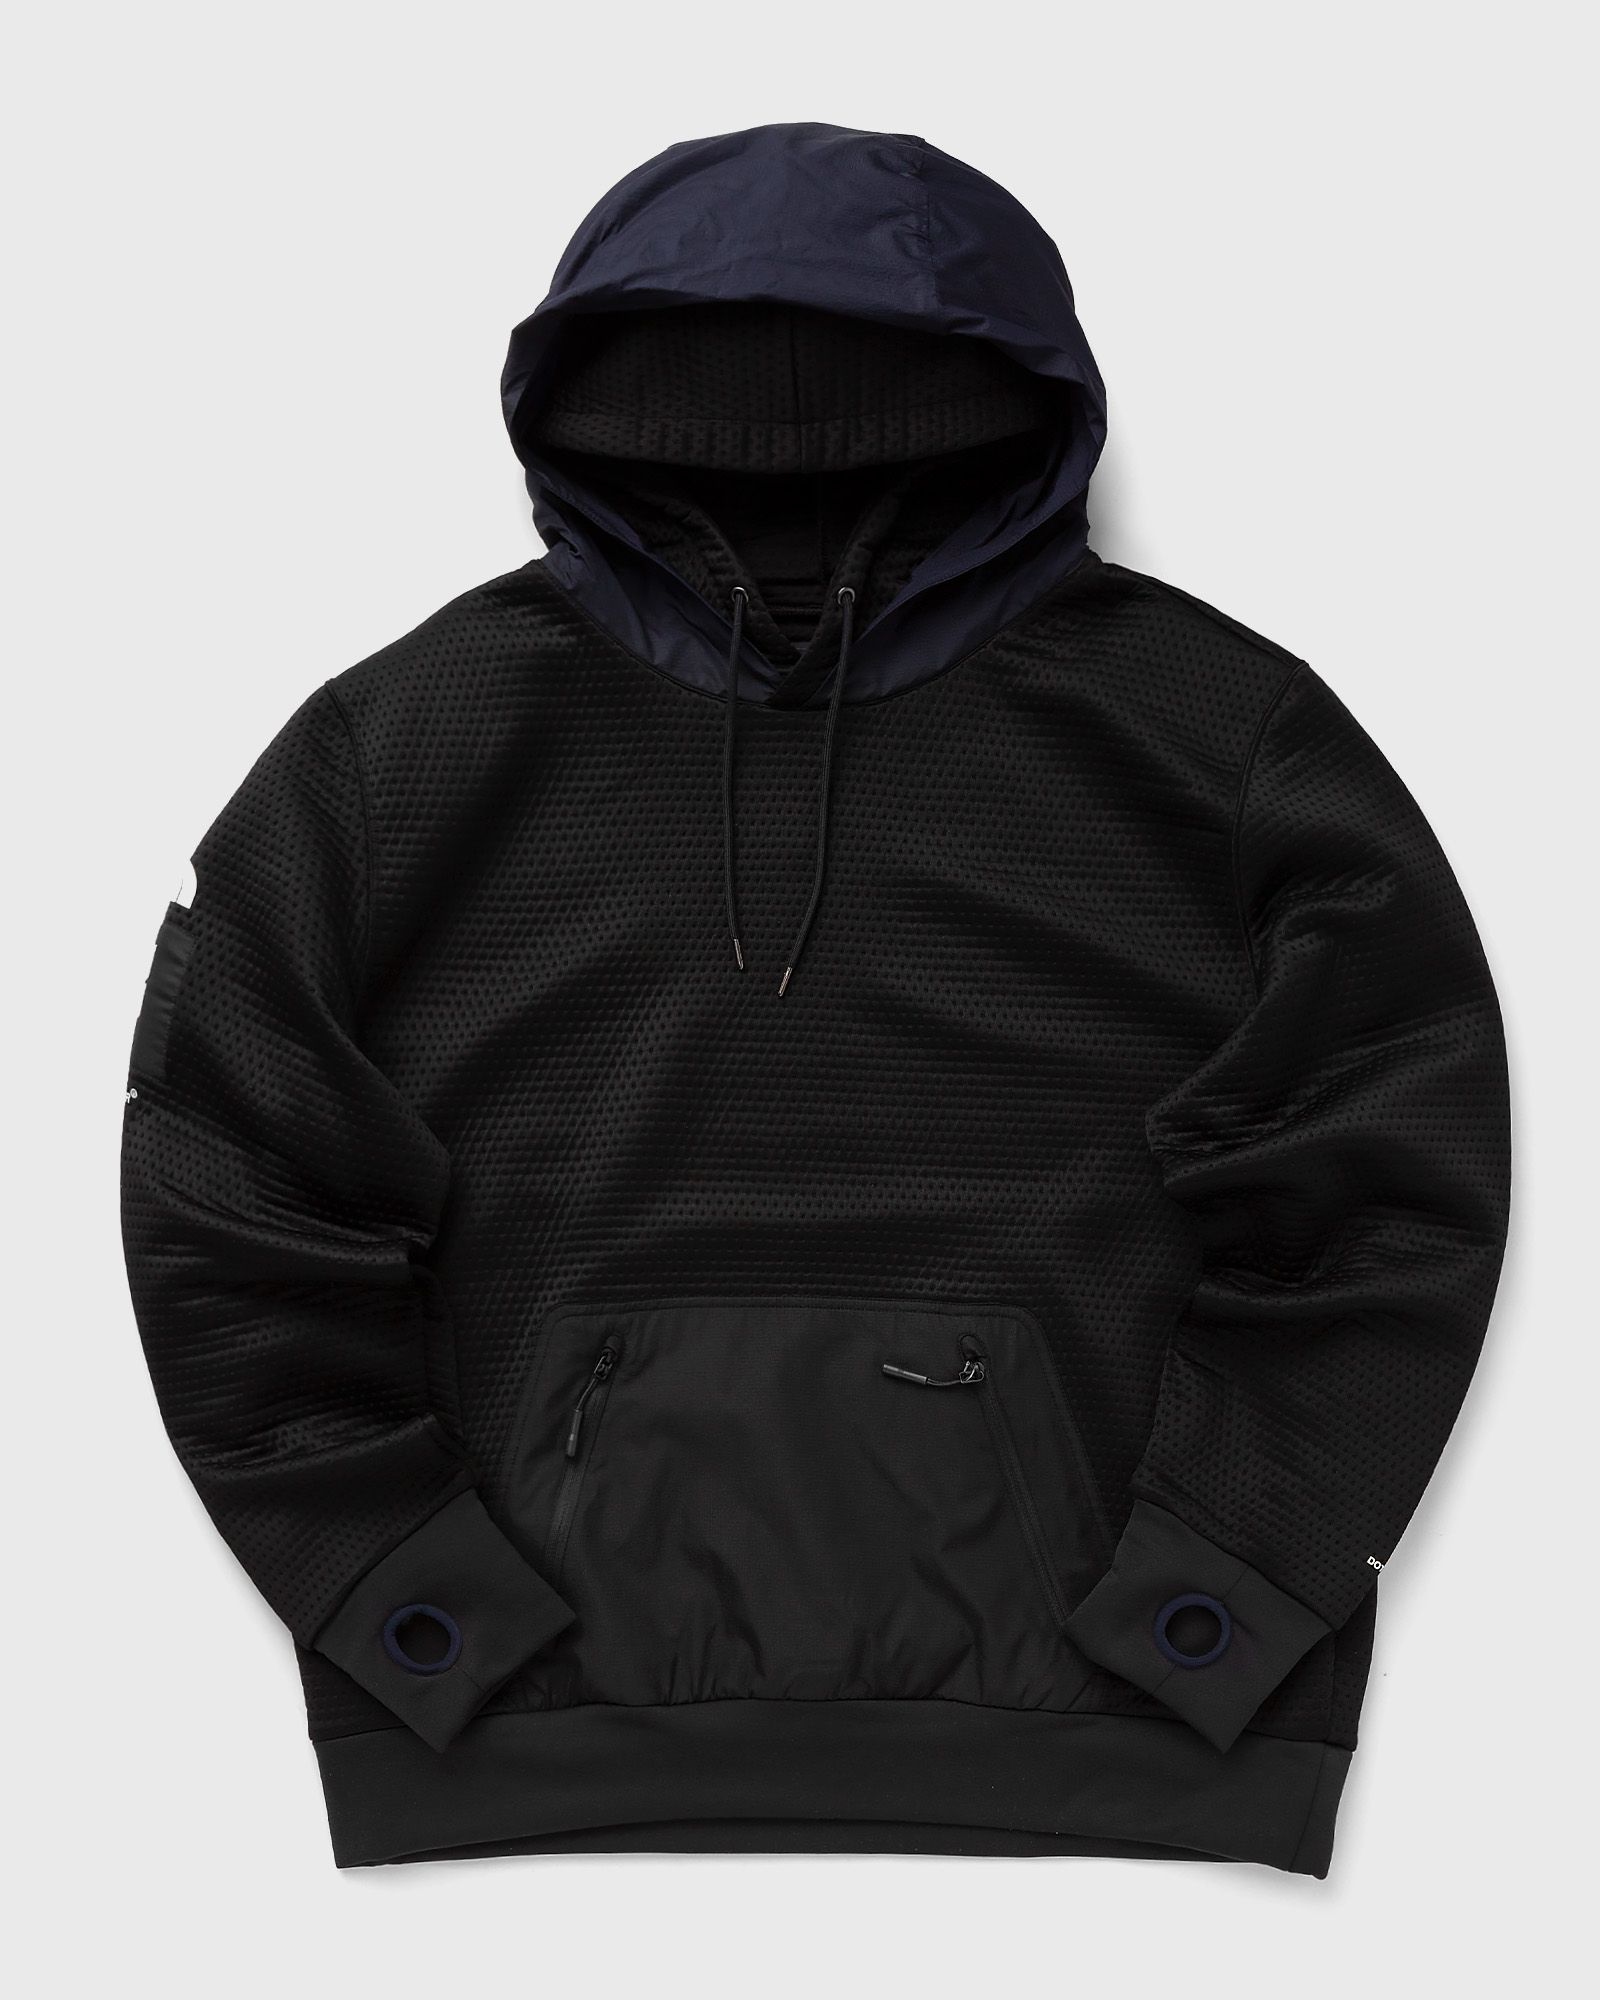 The North Face - x undercover dotknit double hoodie men hoodies black in größe:m